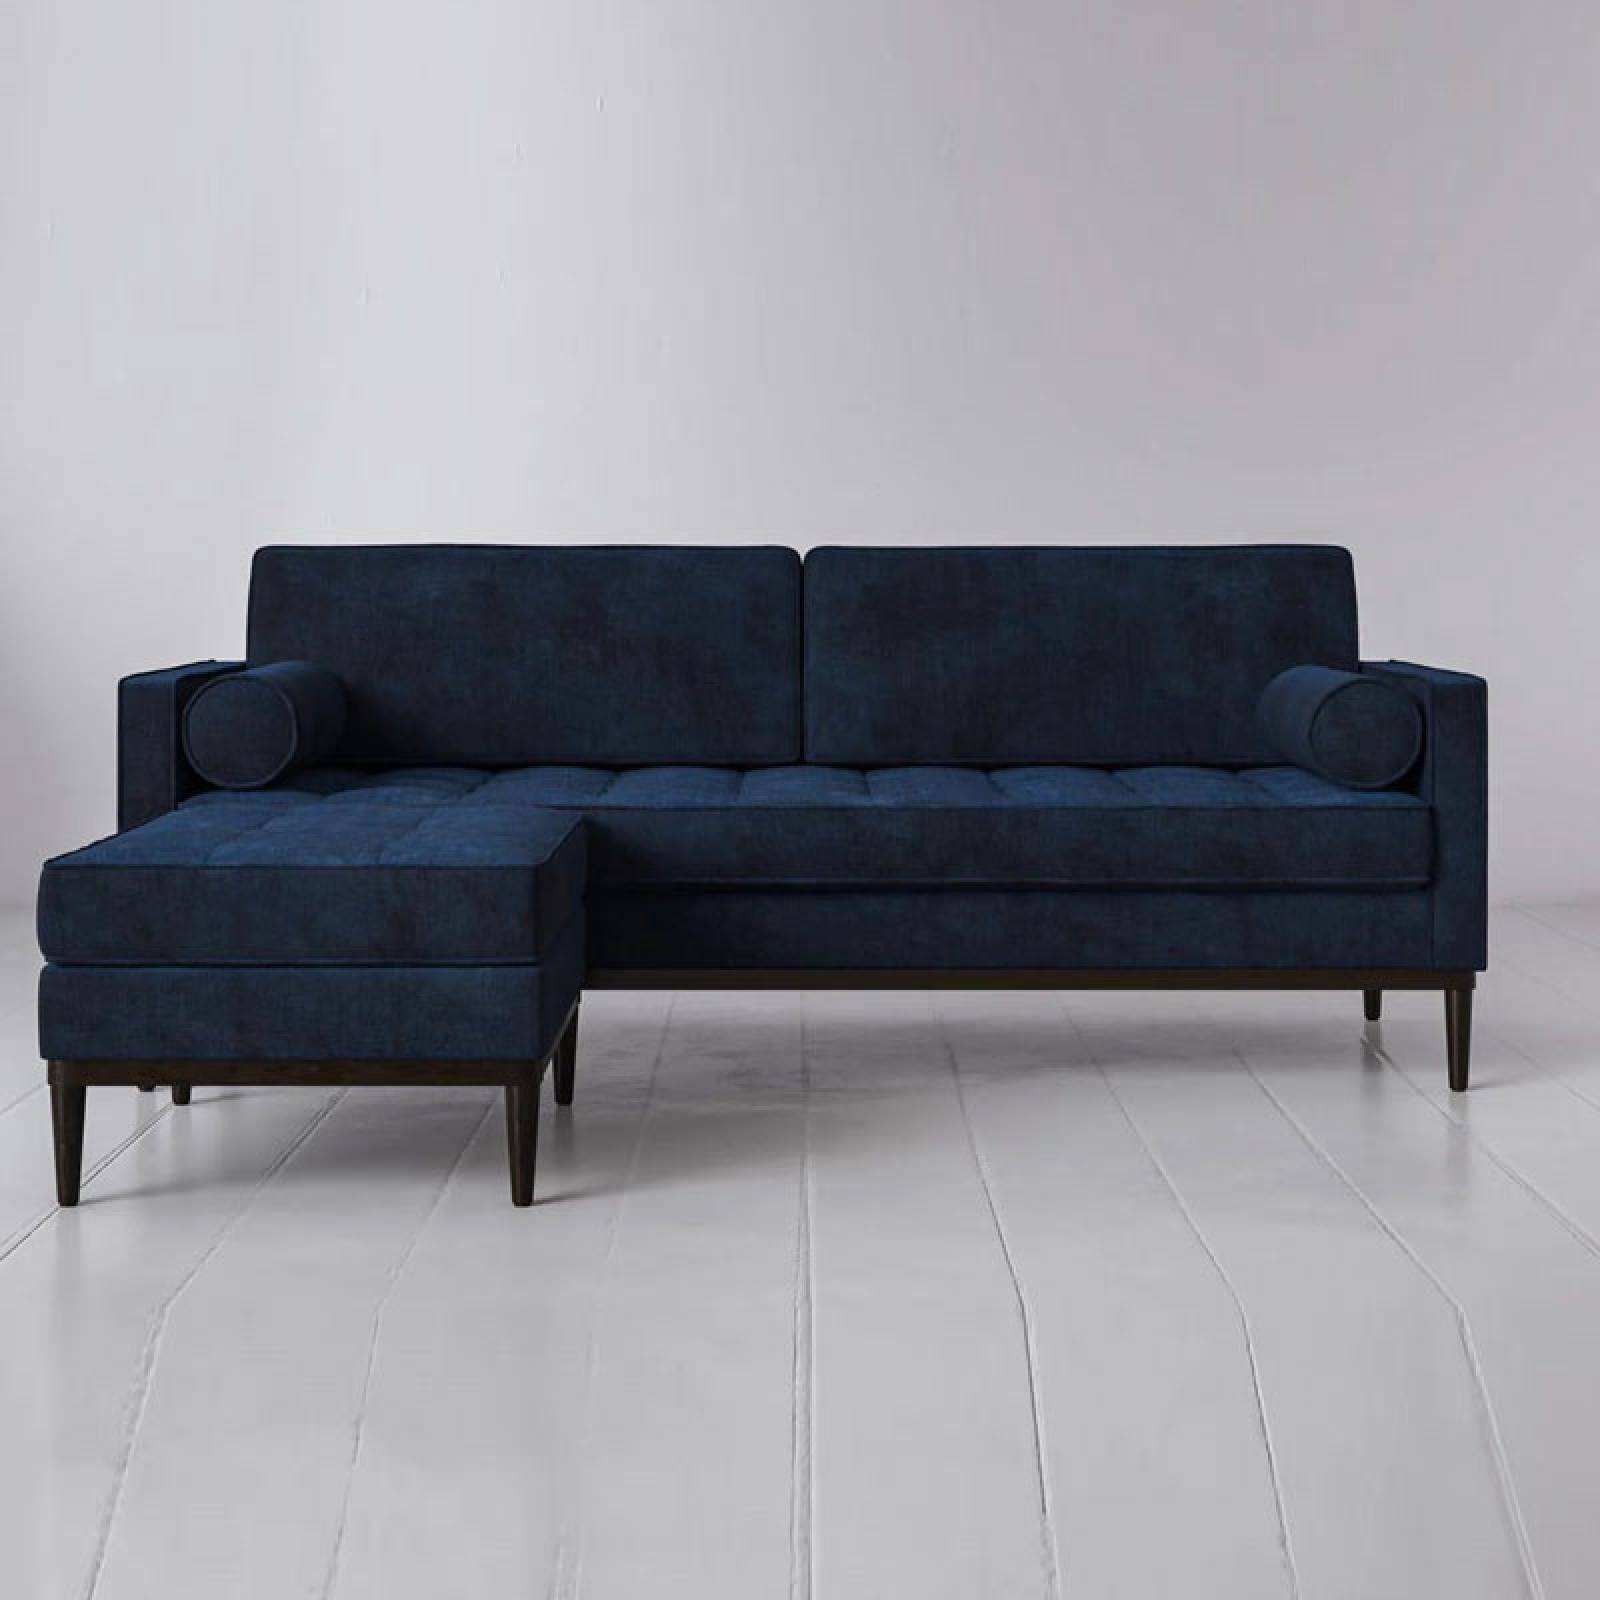 Swyft - Model 02 - 3 Seater Chaise Sofa - Left or Right thumbnails